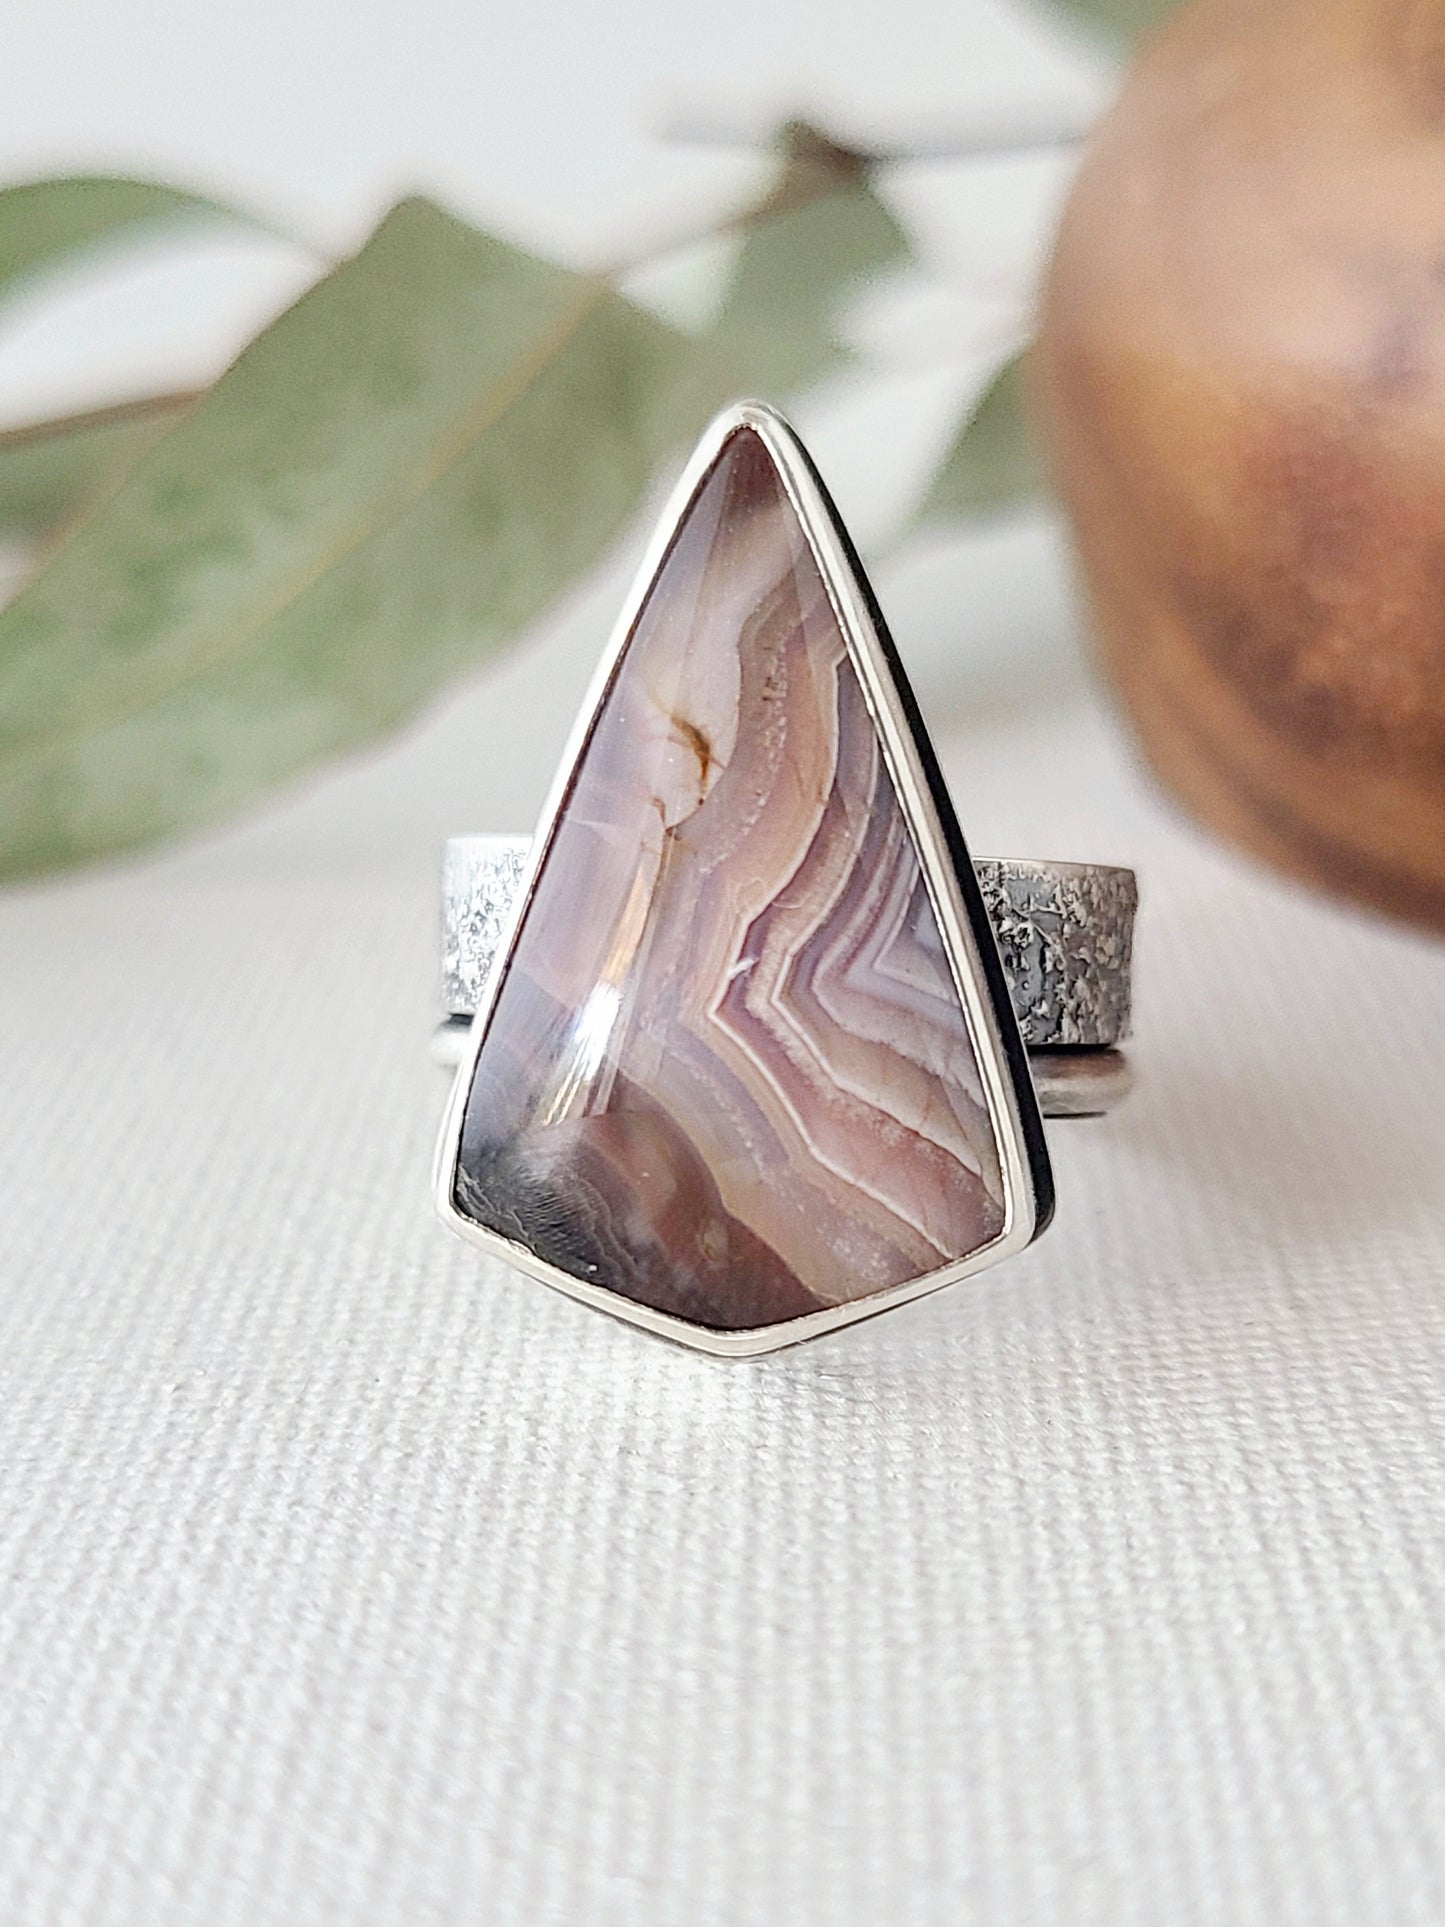 Desert Trail Ring with Laguna Lace Agate-size 9.5 US